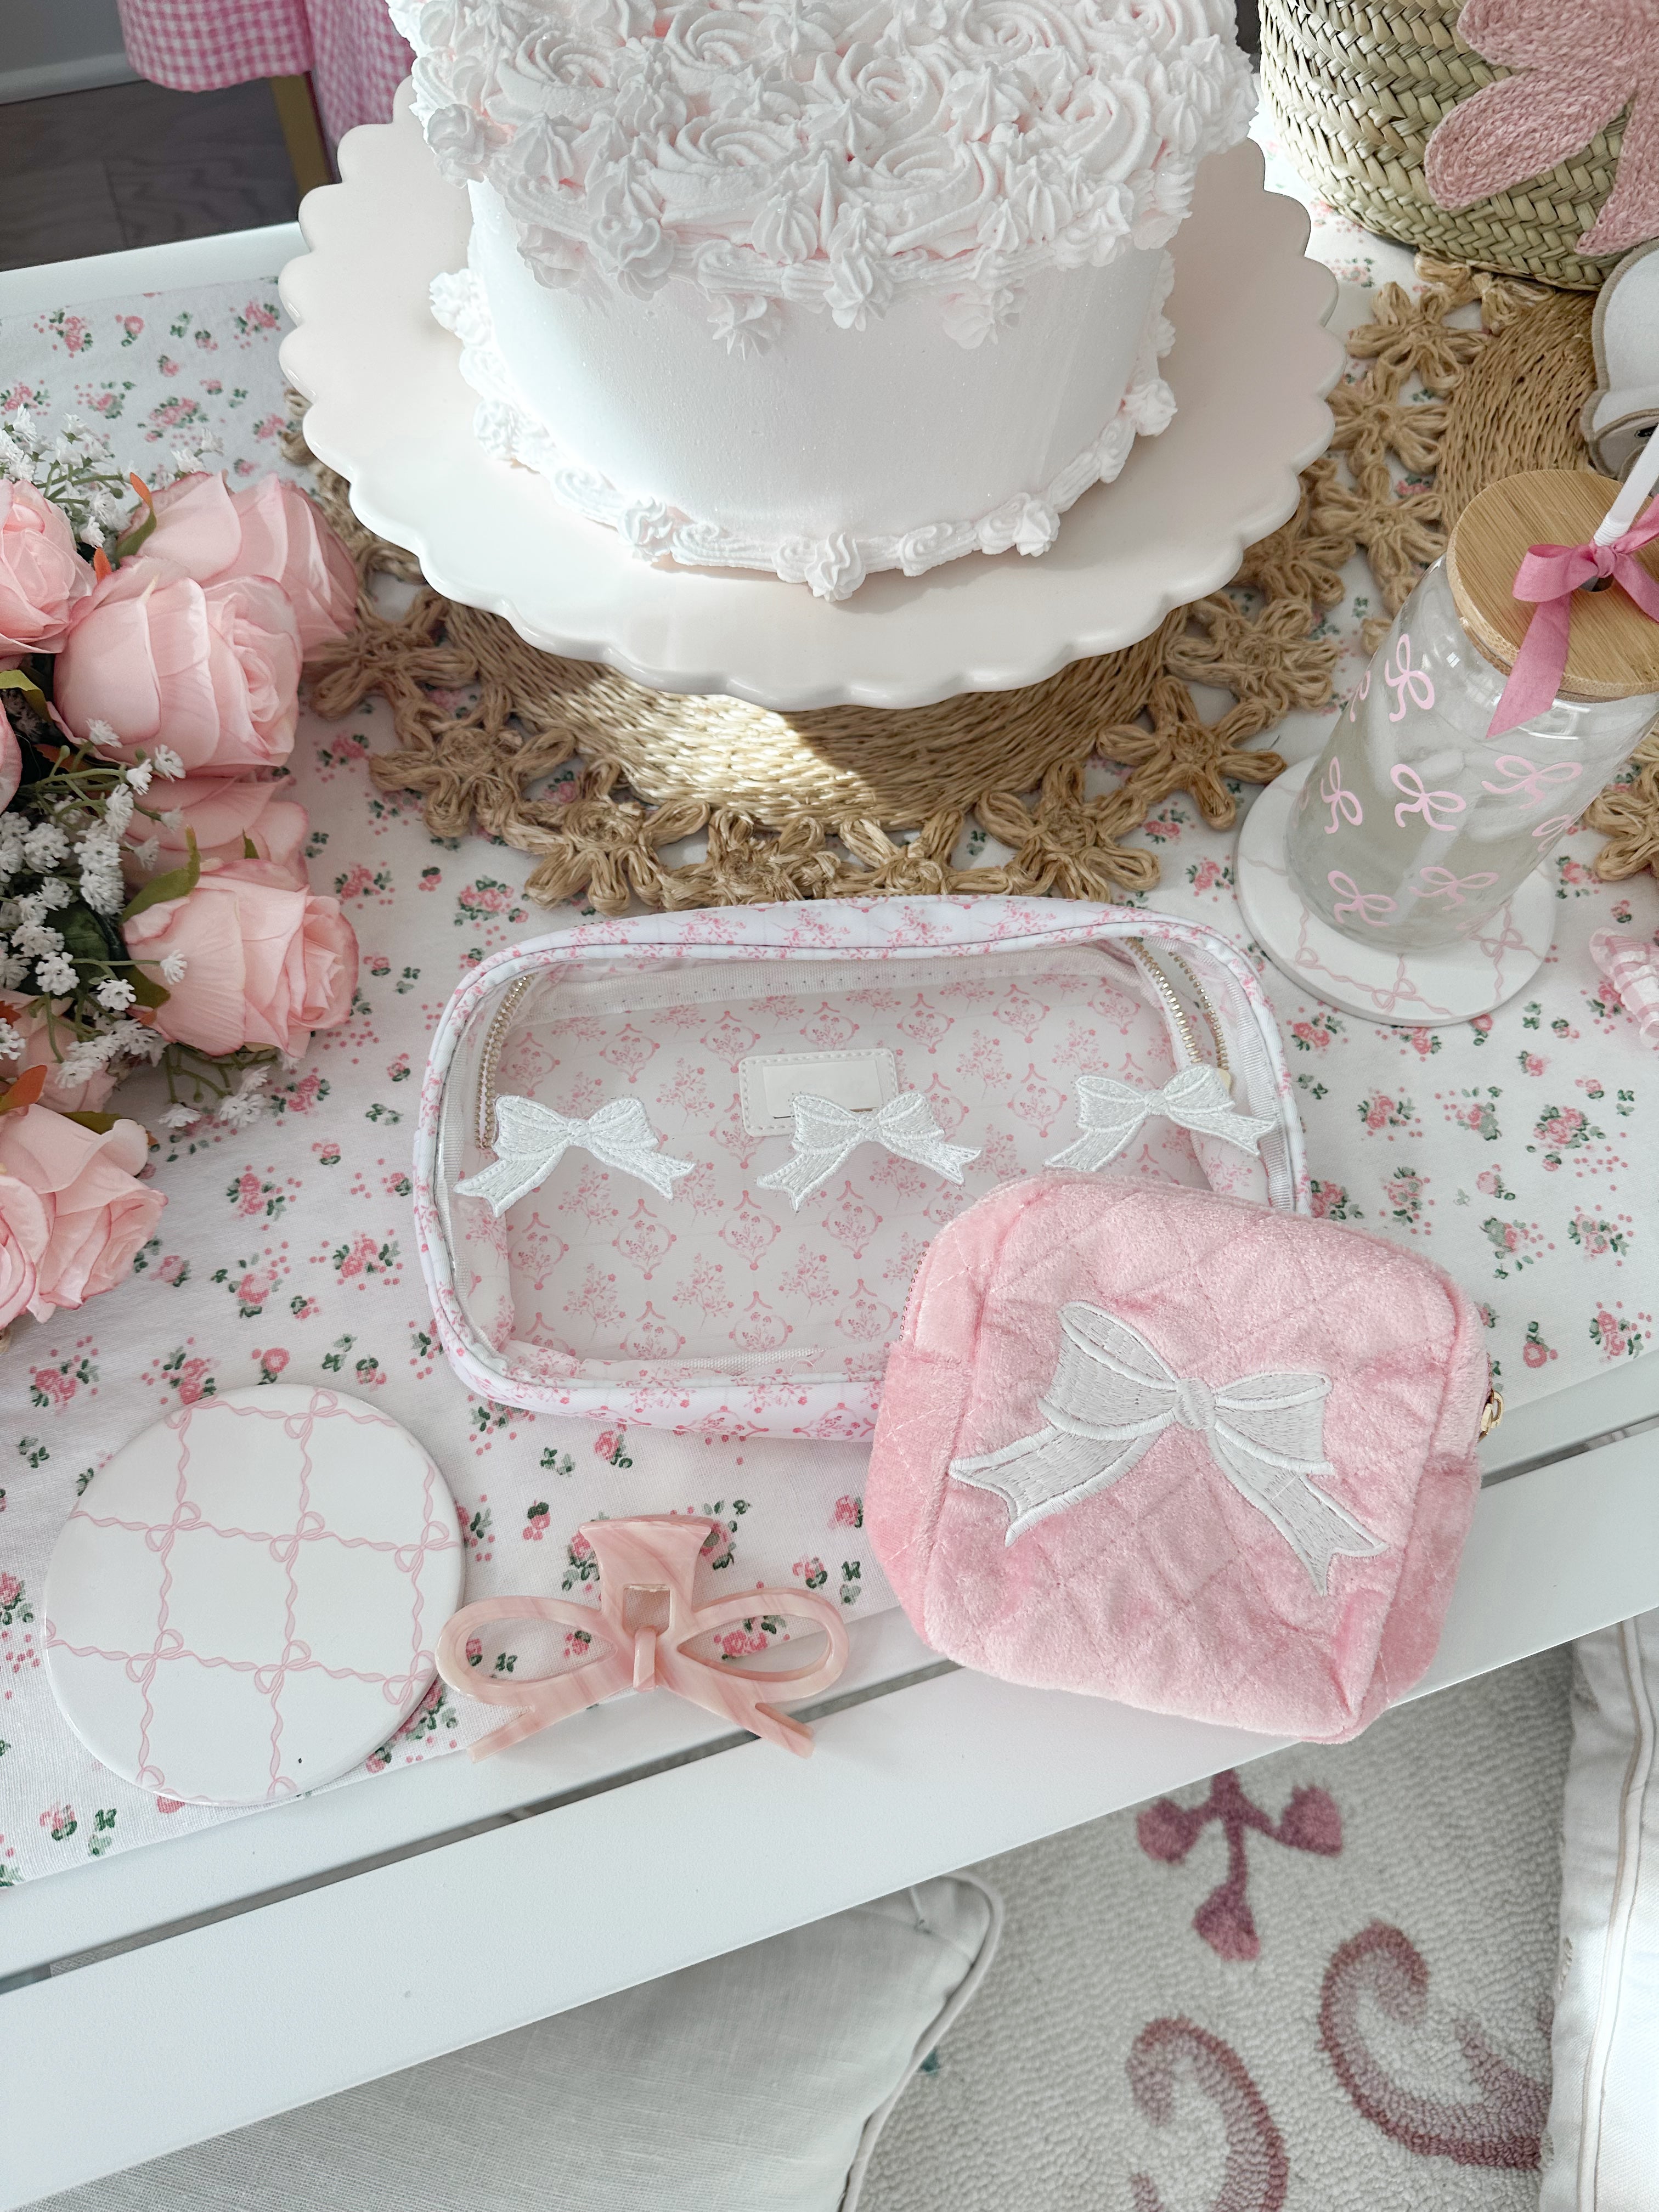 Pink Mini Bow Pouch (pre-order)